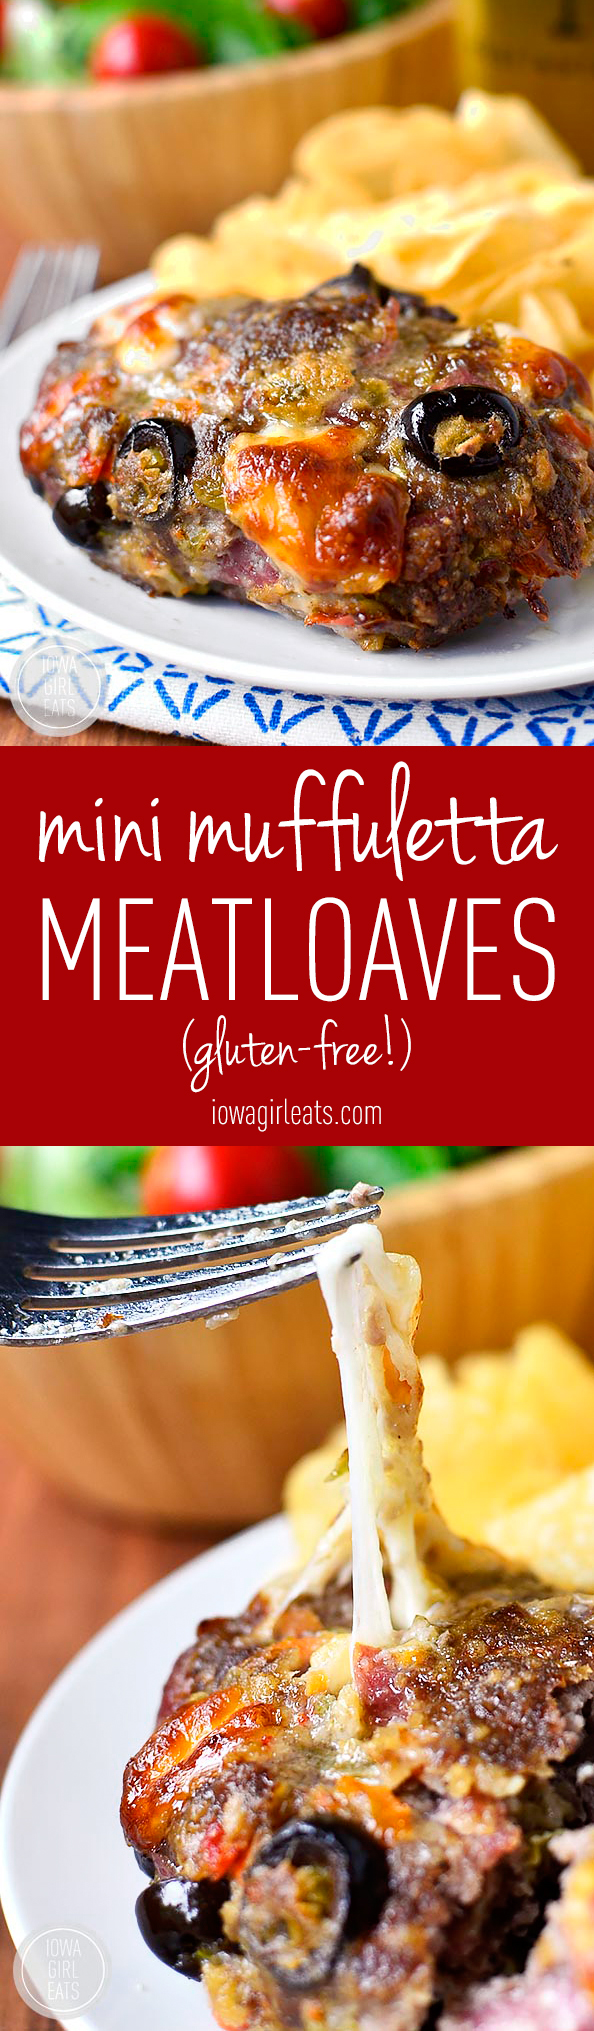 Mini Muffuletta Meatloaves are packed with NOLA-inspired flavor in a miniature, personal-sized meatloaf! #glutenfree | iowagirleats.com